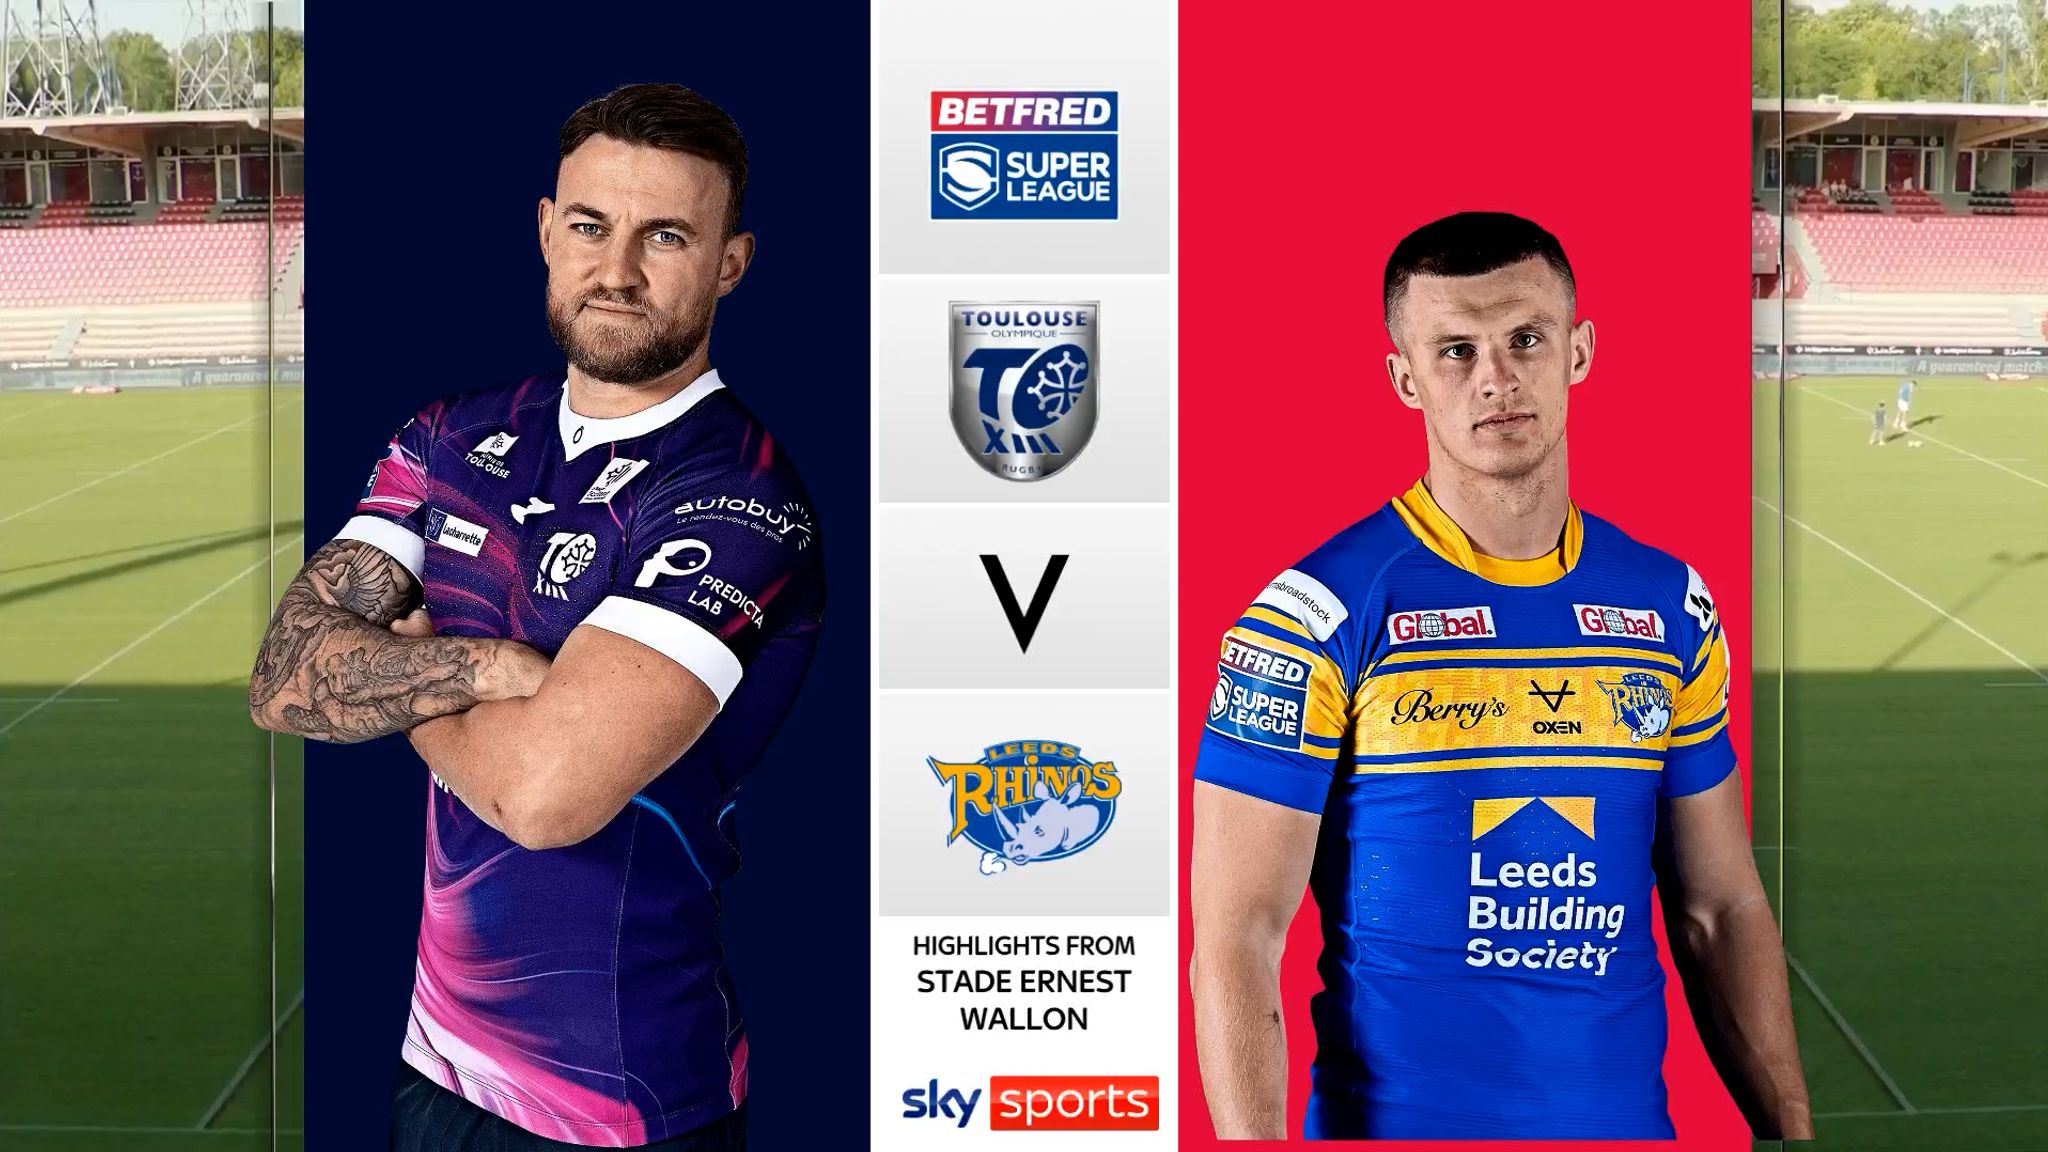 Toulouse 20-6 Leeds Rhinos Super League highlights Video Watch TV Show Sky Sports